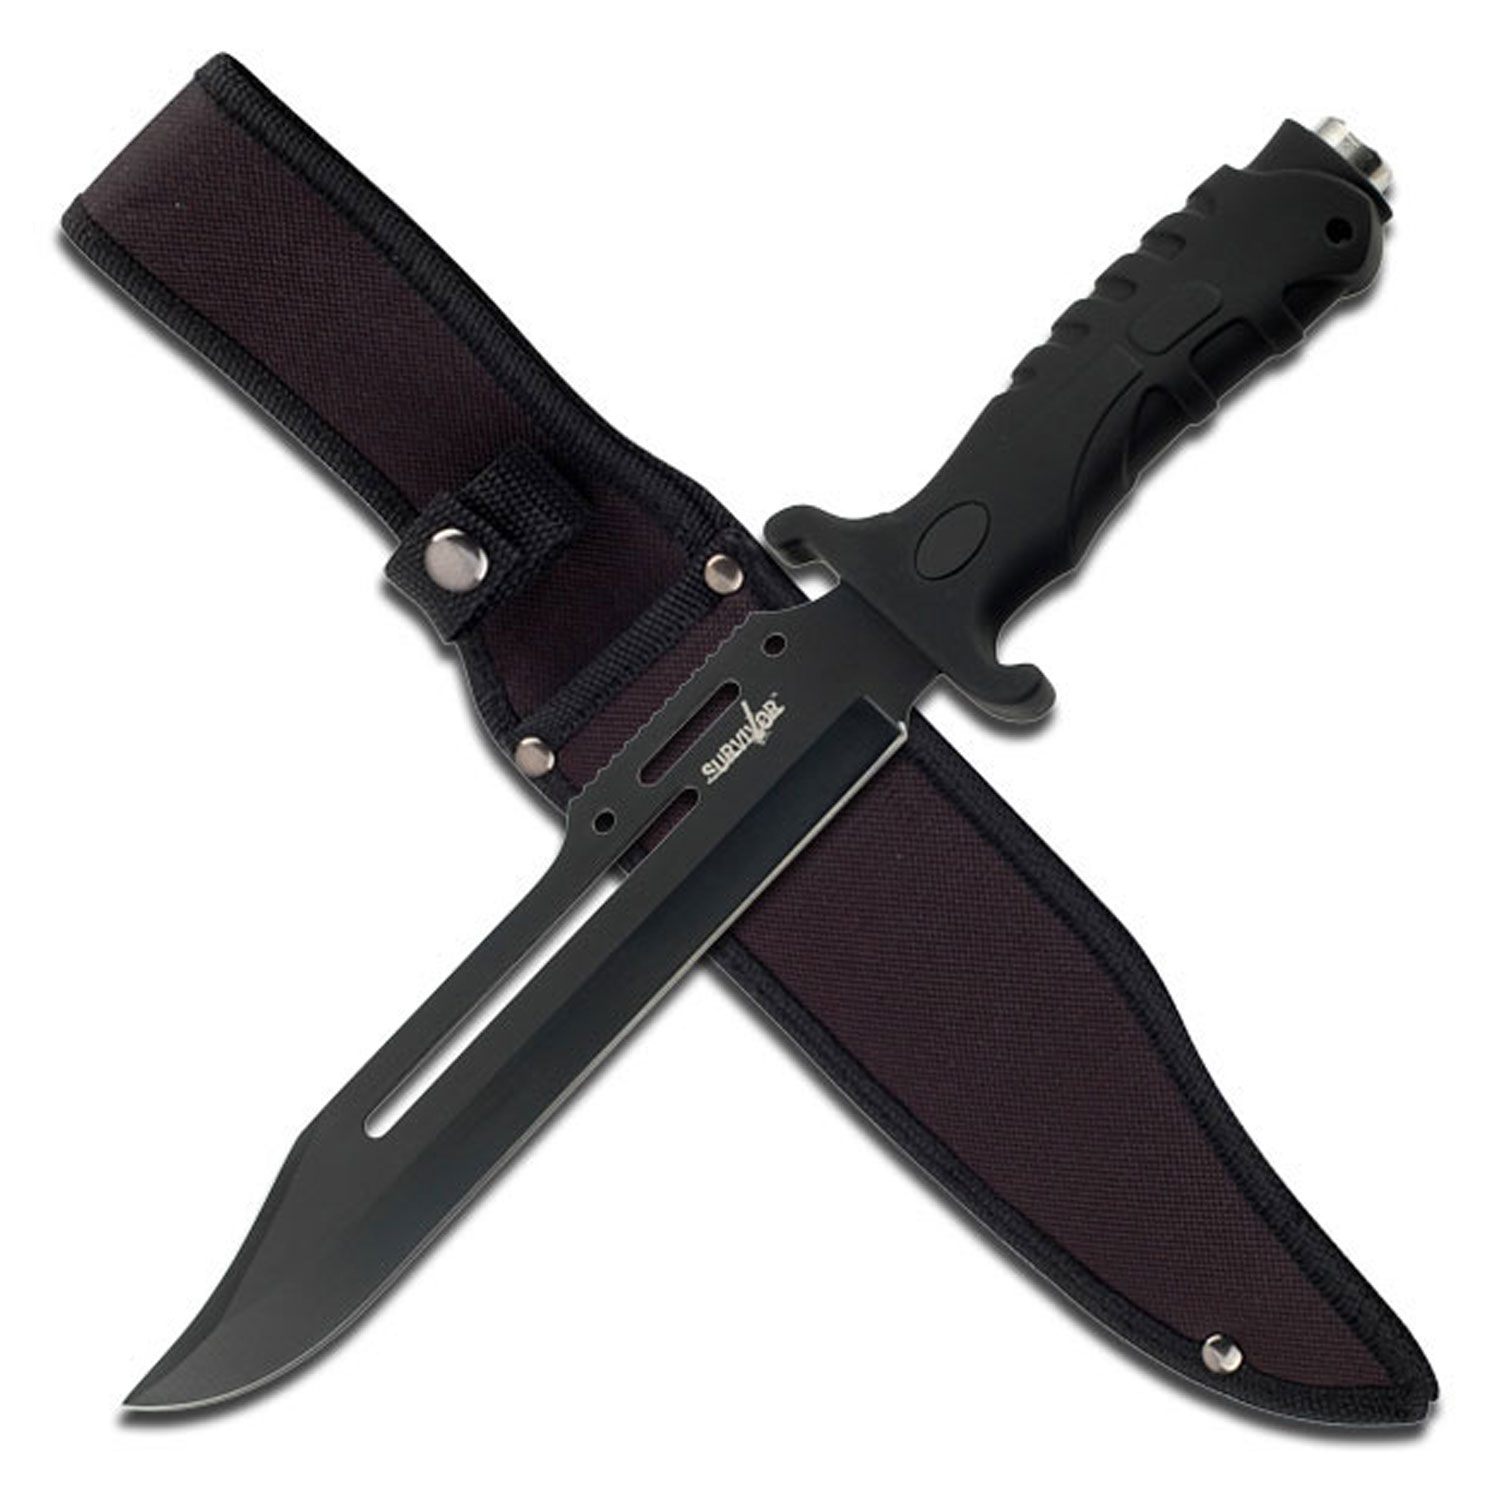  All Black Combat Survivor Hunter Knife. 10 1/2 Inch Overall in length Includes Carrying Case. Features stainless steel black blade.